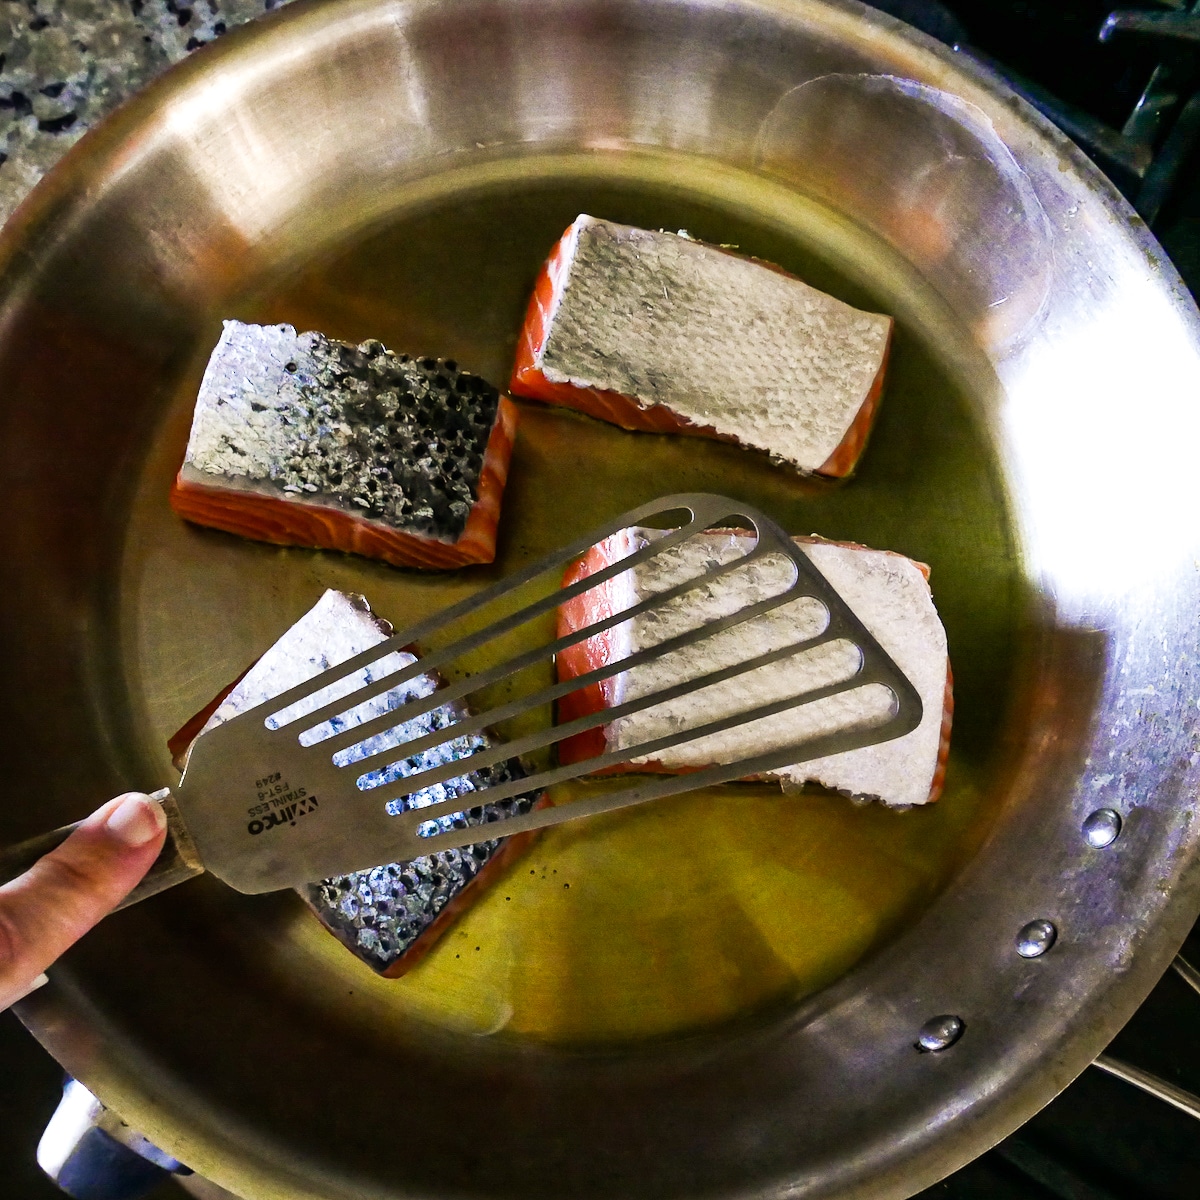 four fillets of salmon cooking in large frying pan.